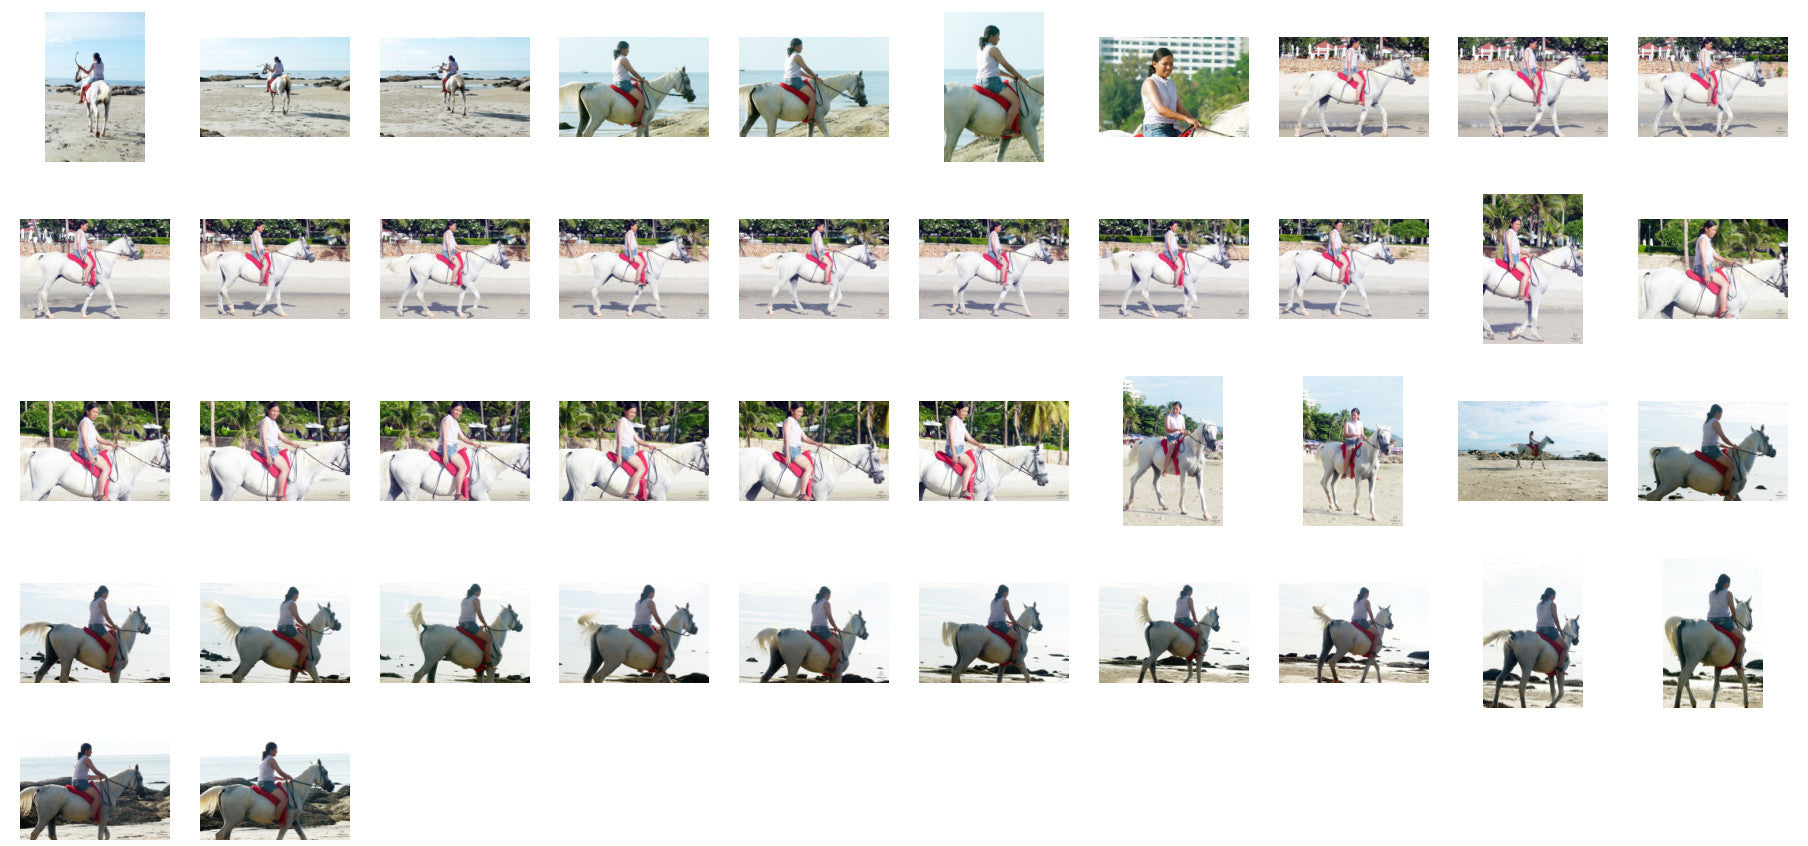 Nam in Hotpants Riding with Bareback Pad on White Arabian Horse, Part 3 - Riding.Vision